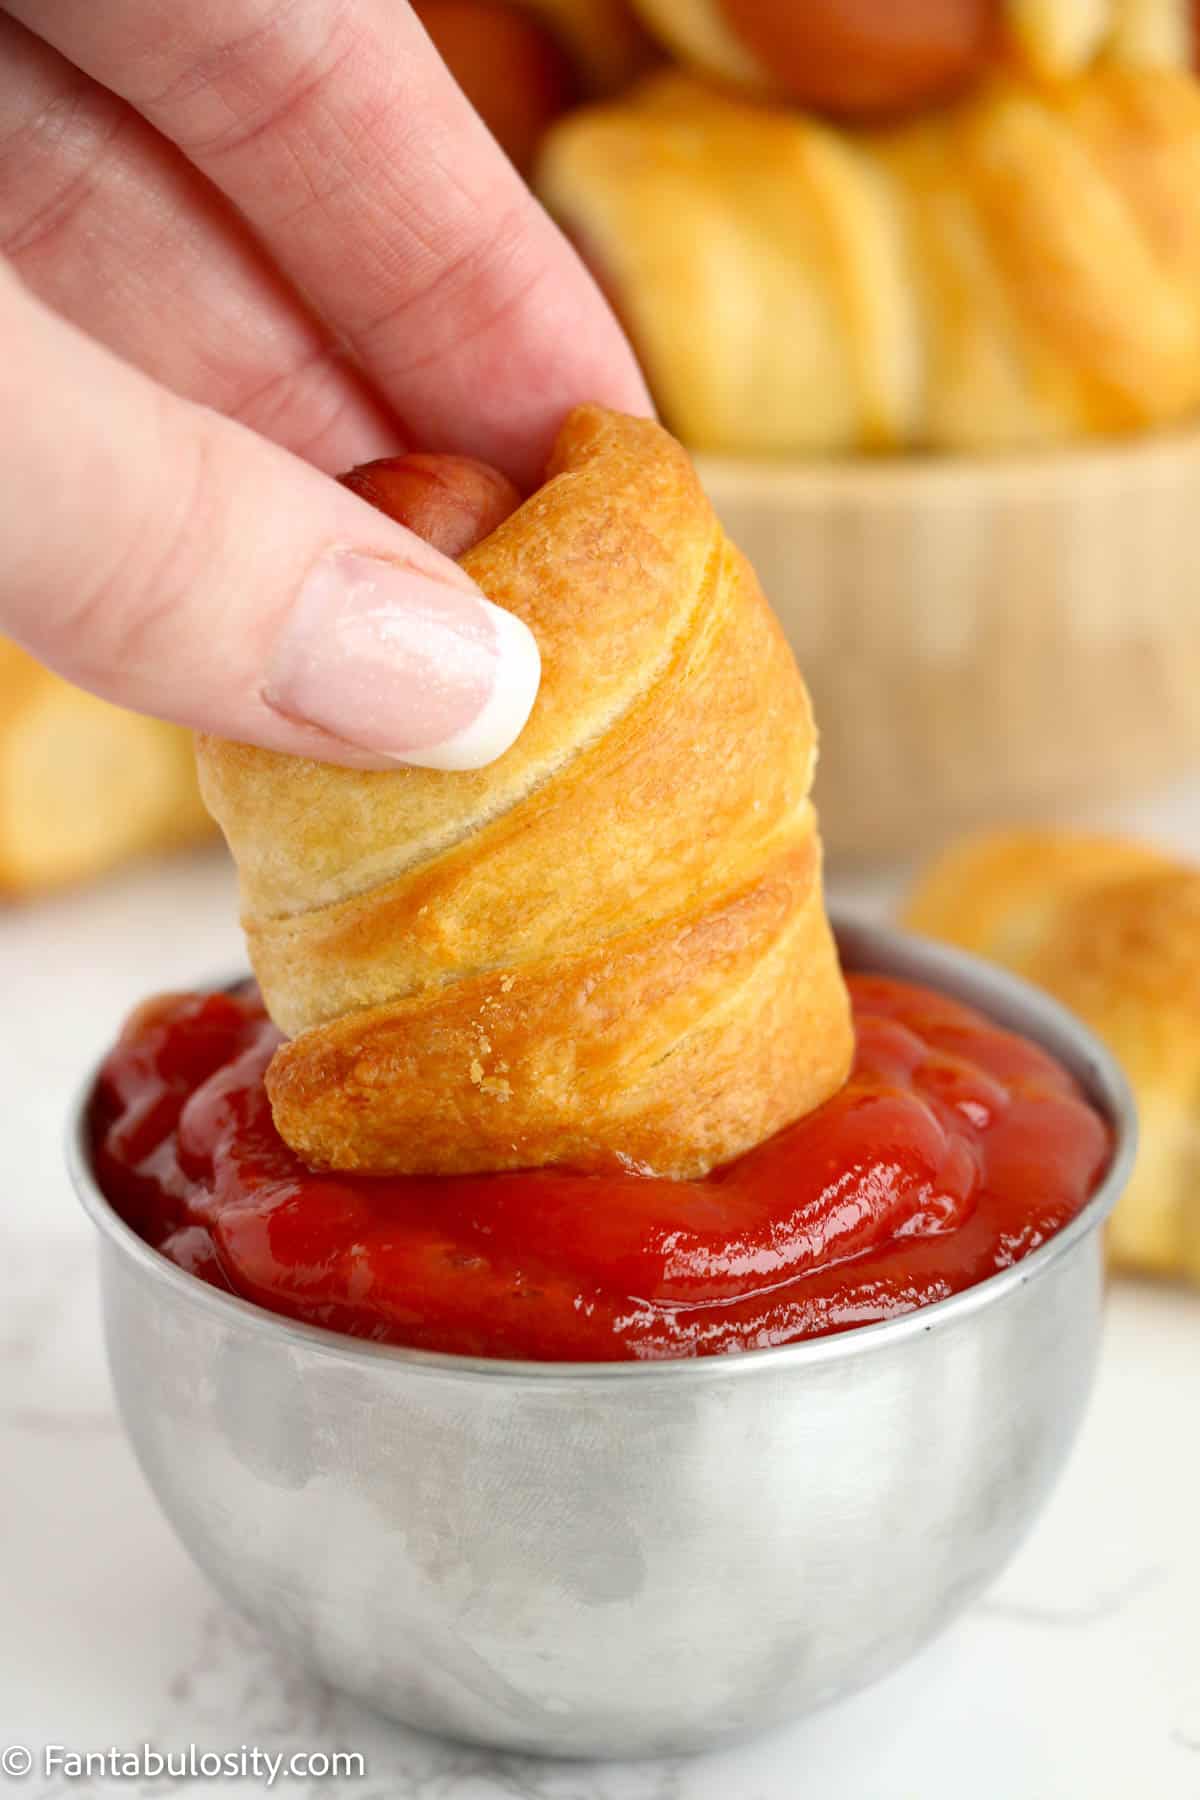 Someone dipping a pig in a blanket into ketchup that is in a tiny stainless steel bowl.